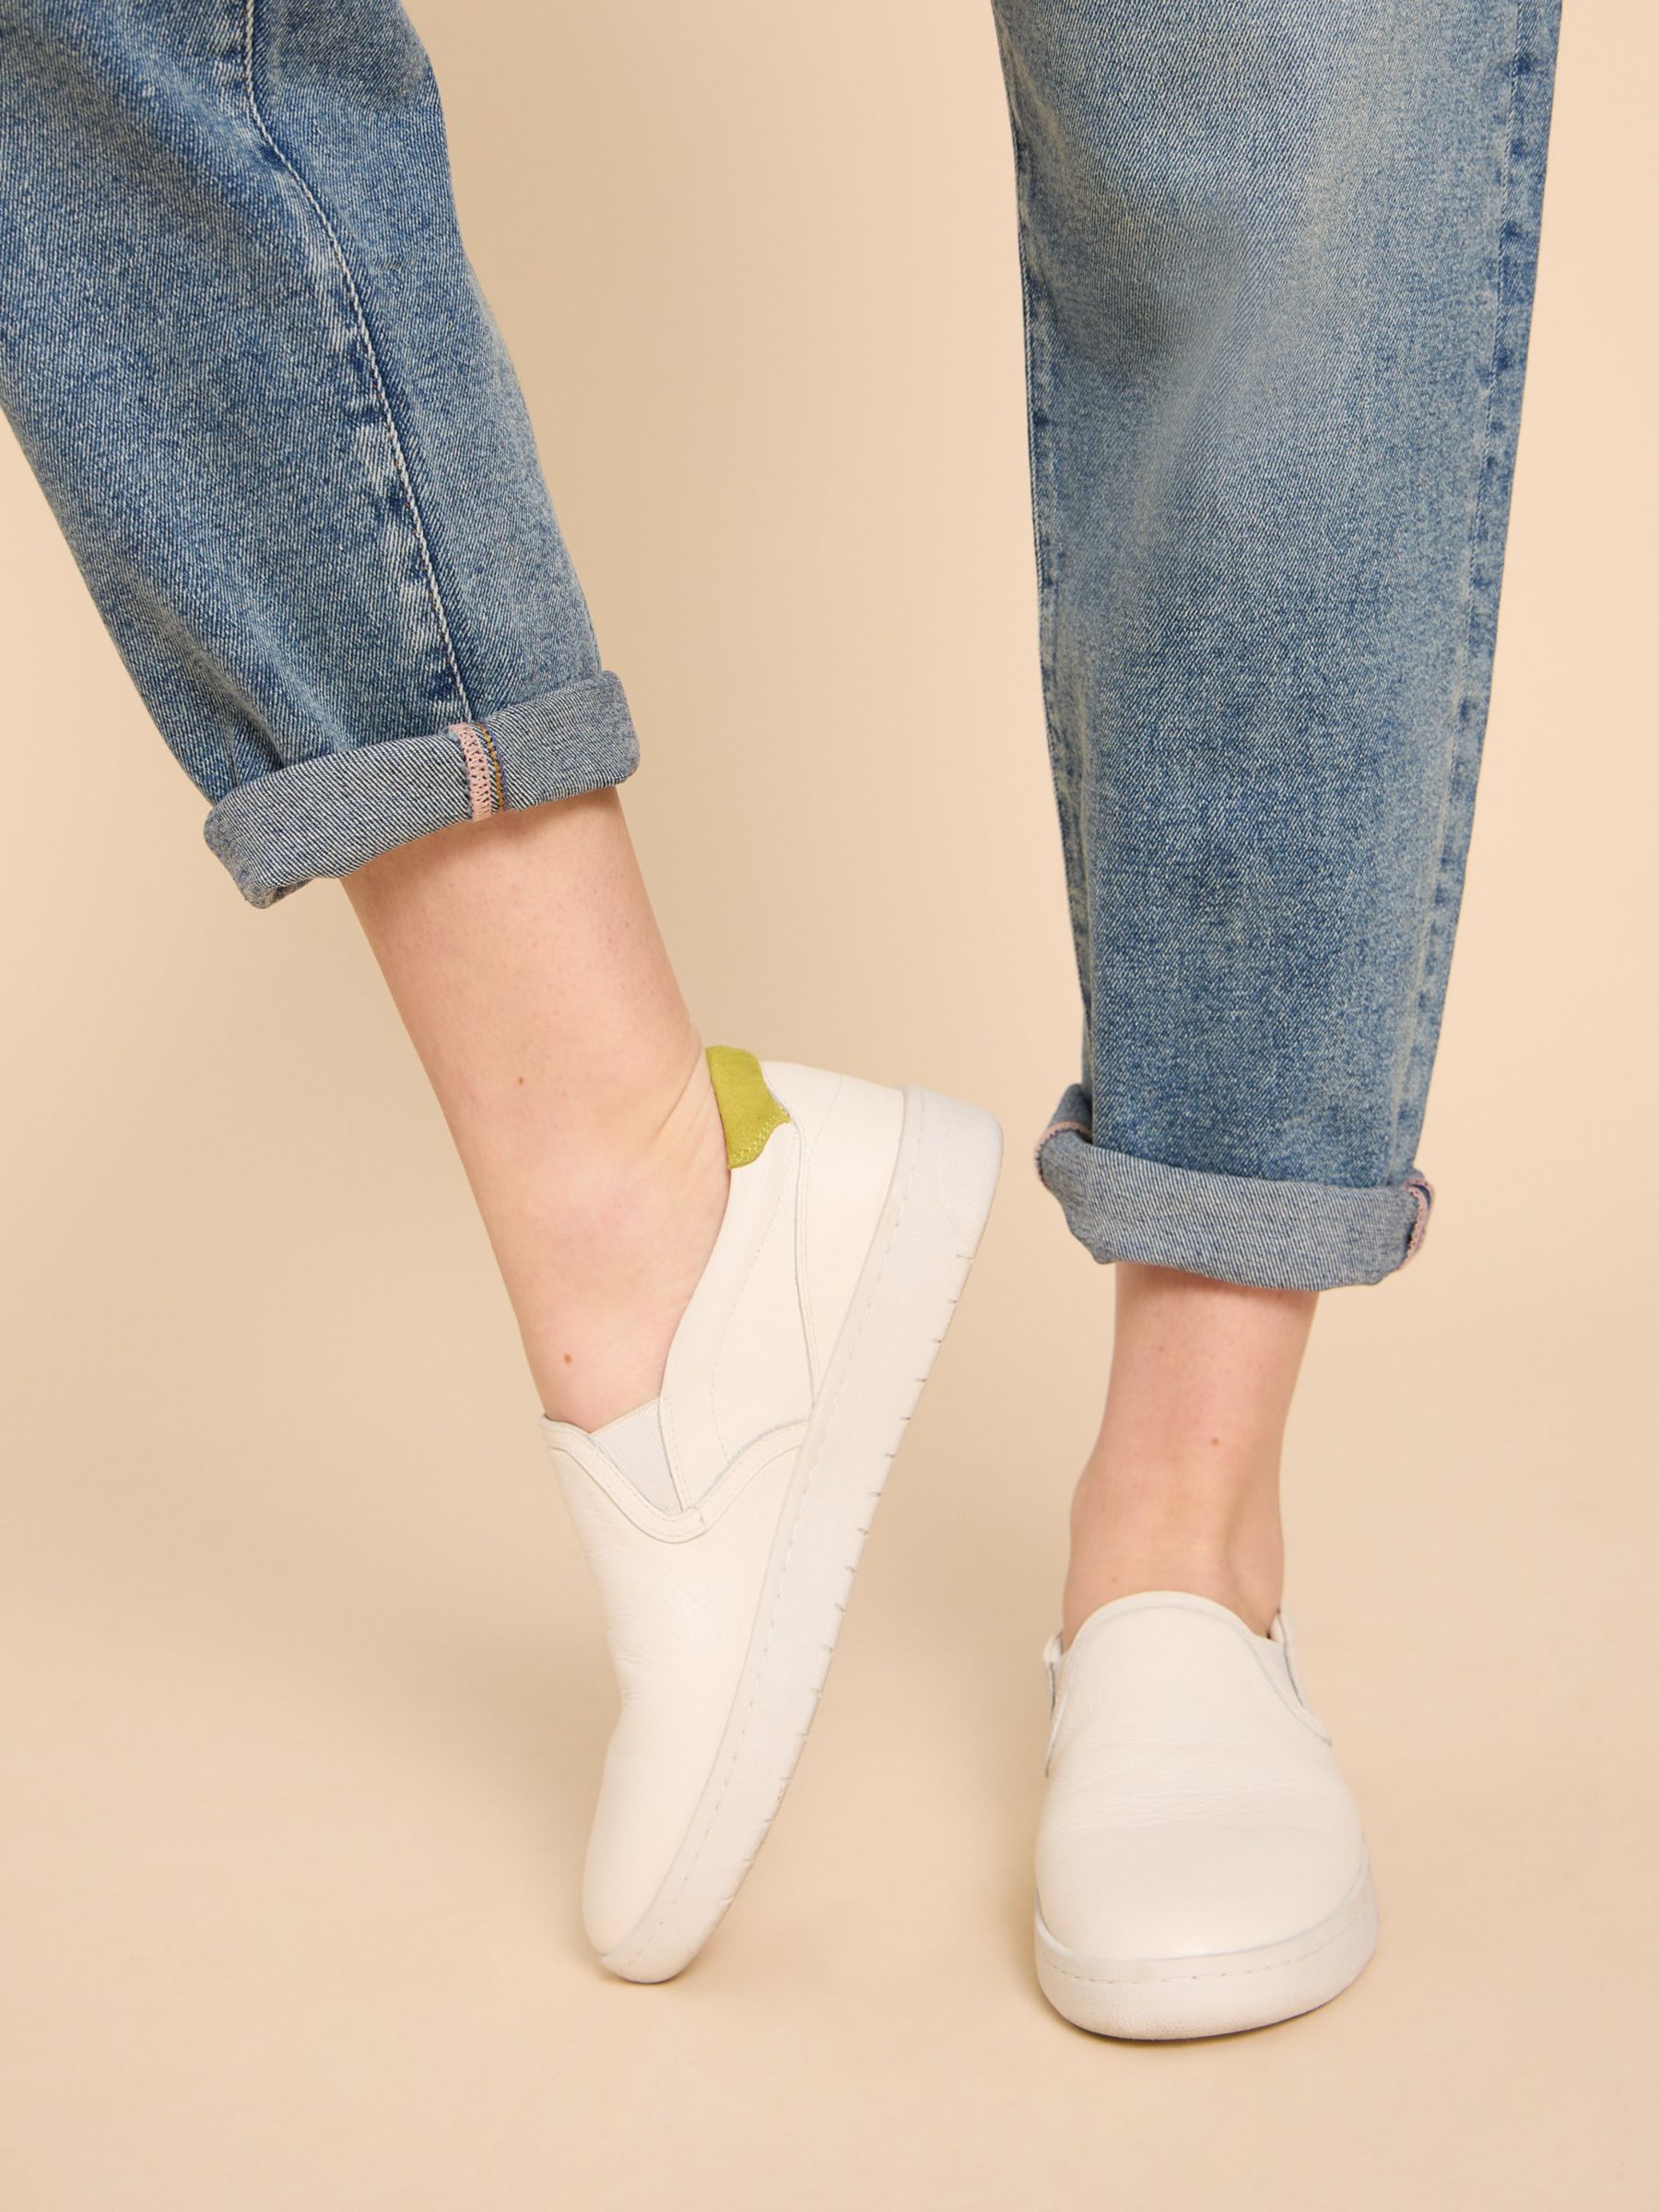 Buy White Stuff Leather Slip On Trainers, White Online at johnlewis.com